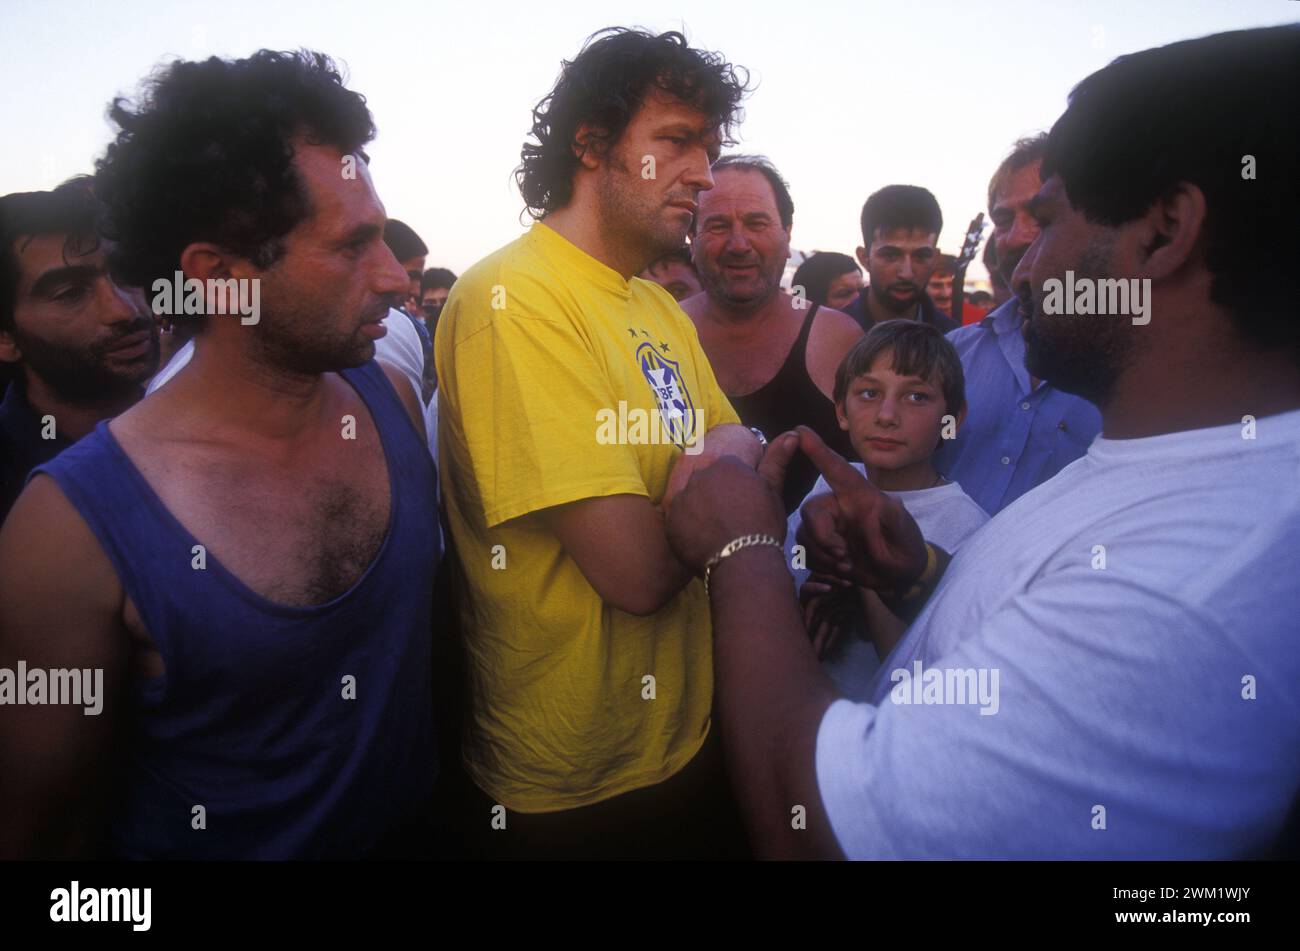 MME4733887 Rome, 1999. Serbian director Emir Kusturica visits the Casilino 700 gipsy camp/Roma, 1999. He registered Emir Kusturica in visita al campo nomadi Casilino 700 -; (add.info.: Rome, 1999. Serbian director Emir Kusturica visits the Casilino 700 gipsy camp/Roma, 1999. He registered Emir Kusturica in visita al campo nomadi Casilino 700 -); © Marcello Mencarini. All rights reserved 2024. Stock Photo